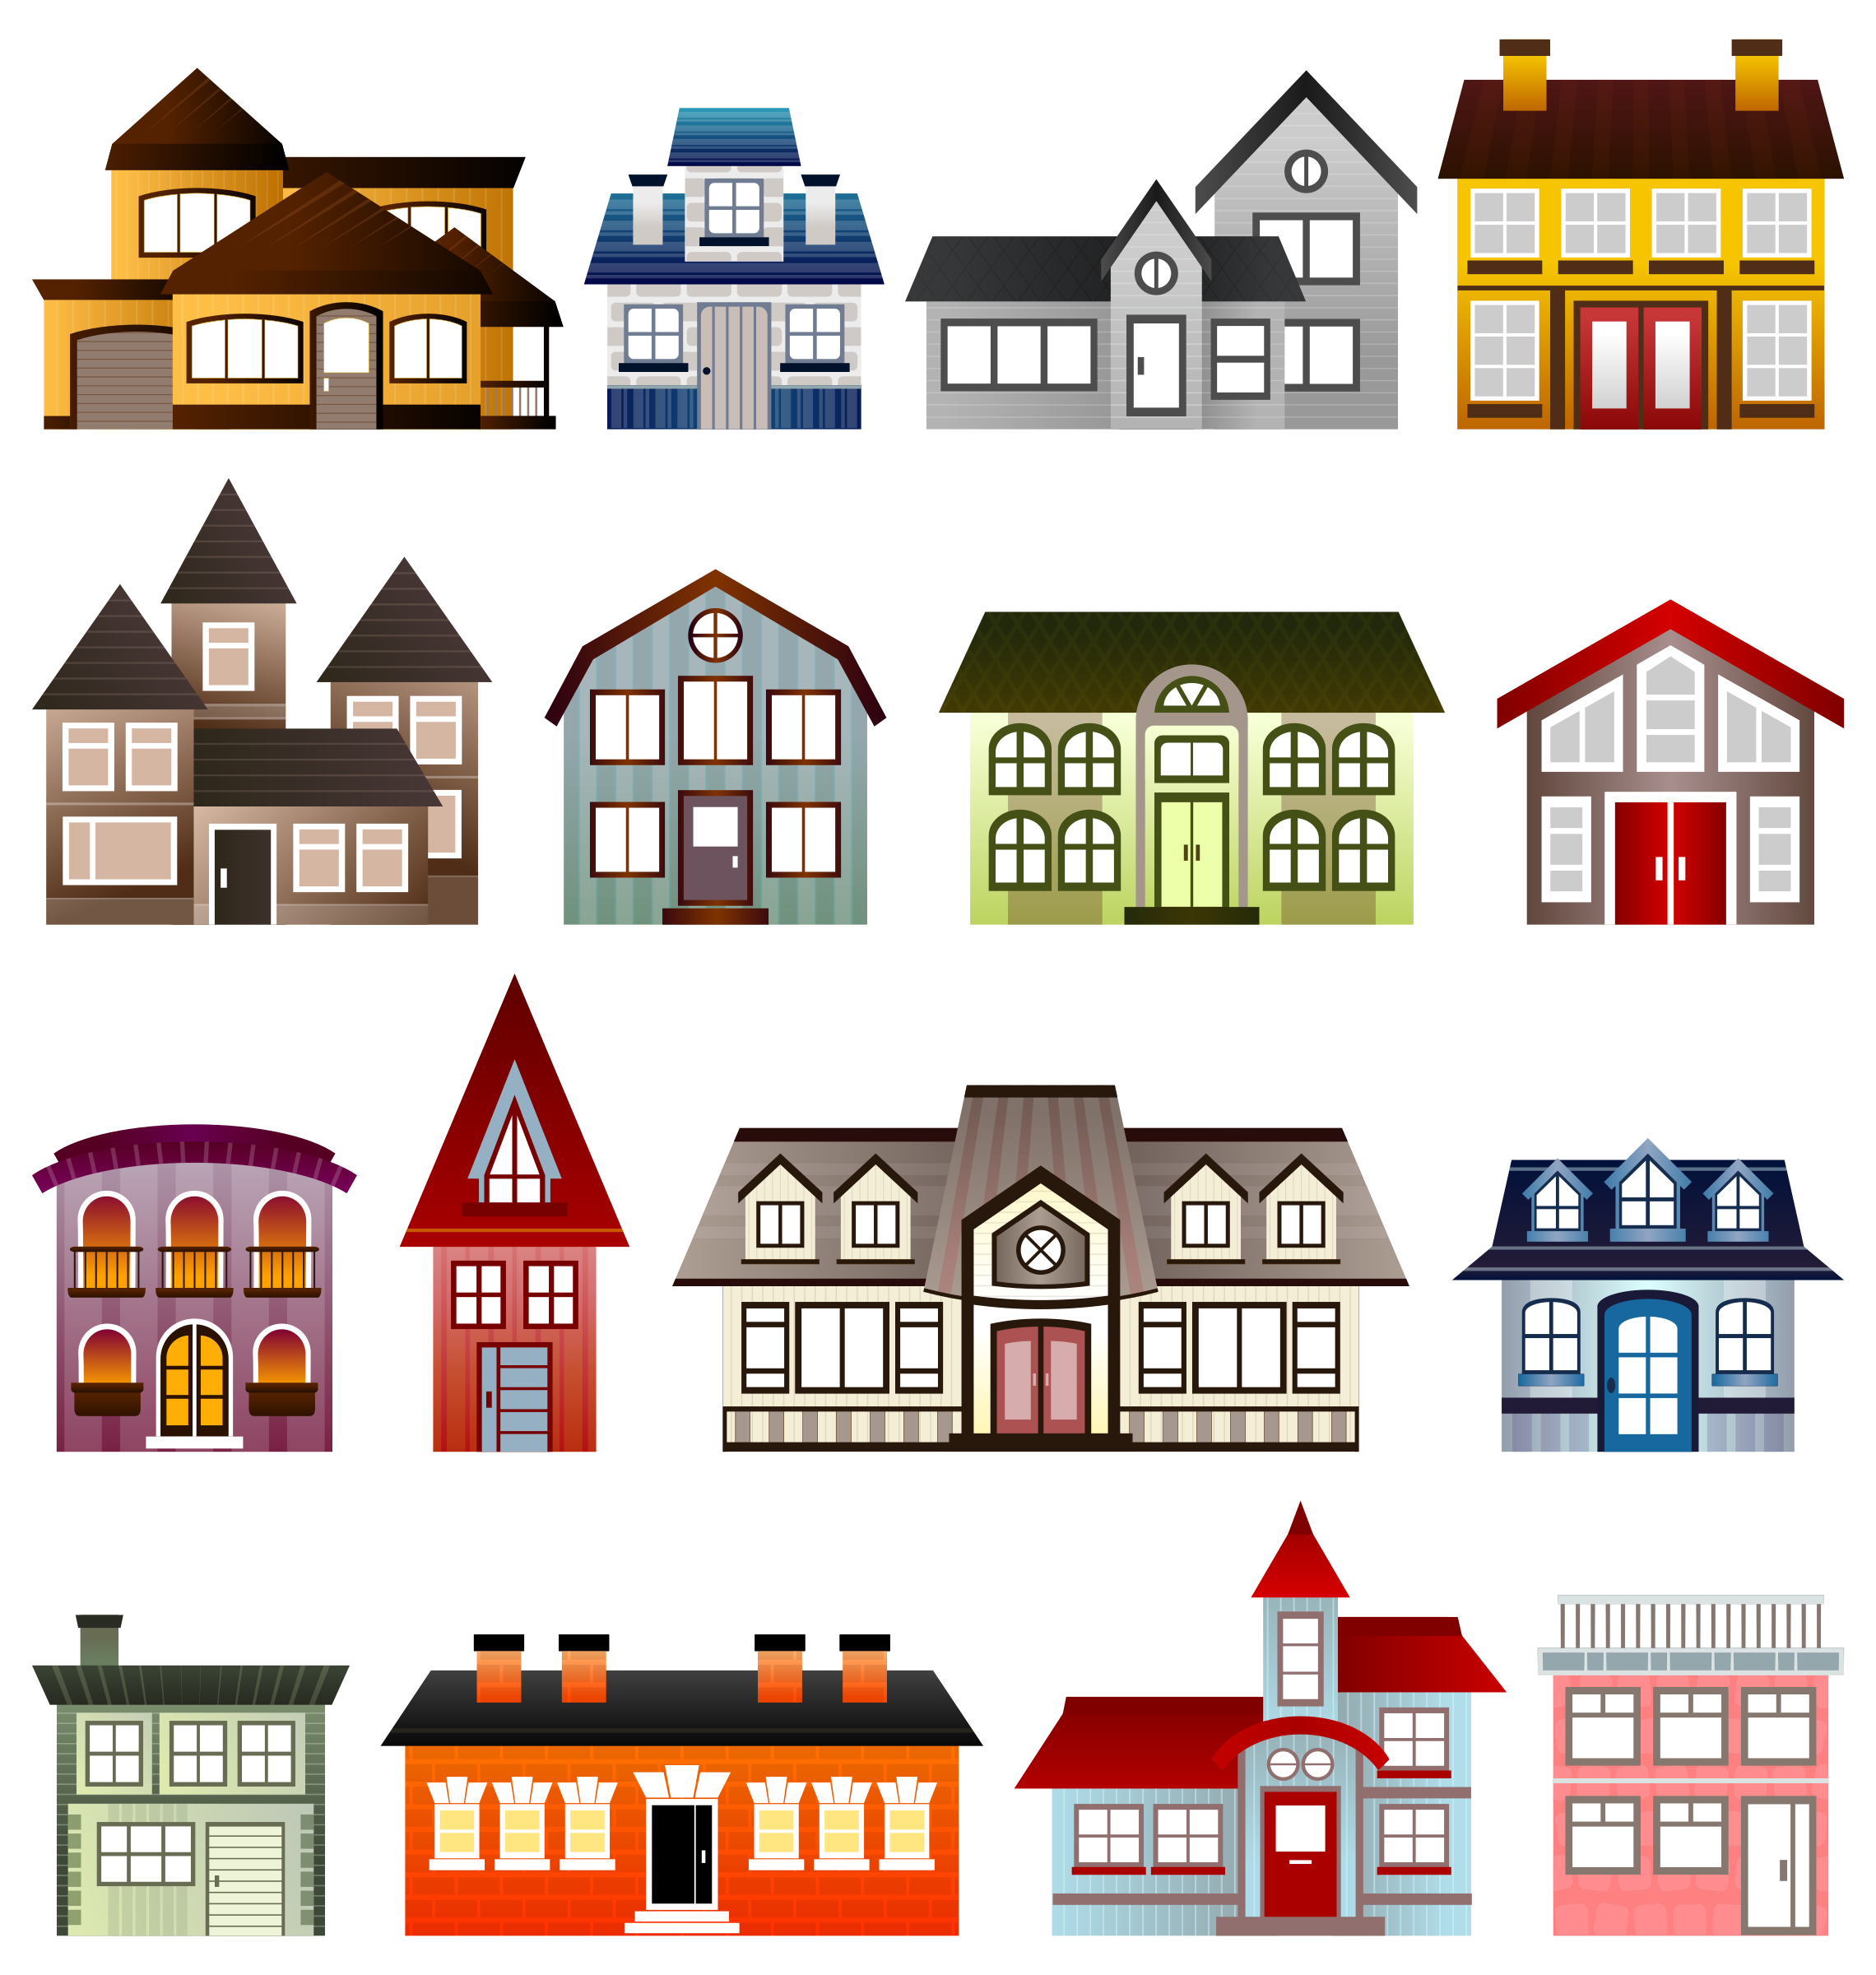 Download Simple Houses Vector Clipart image - Free stock photo - Public Domain photo - CC0 Images